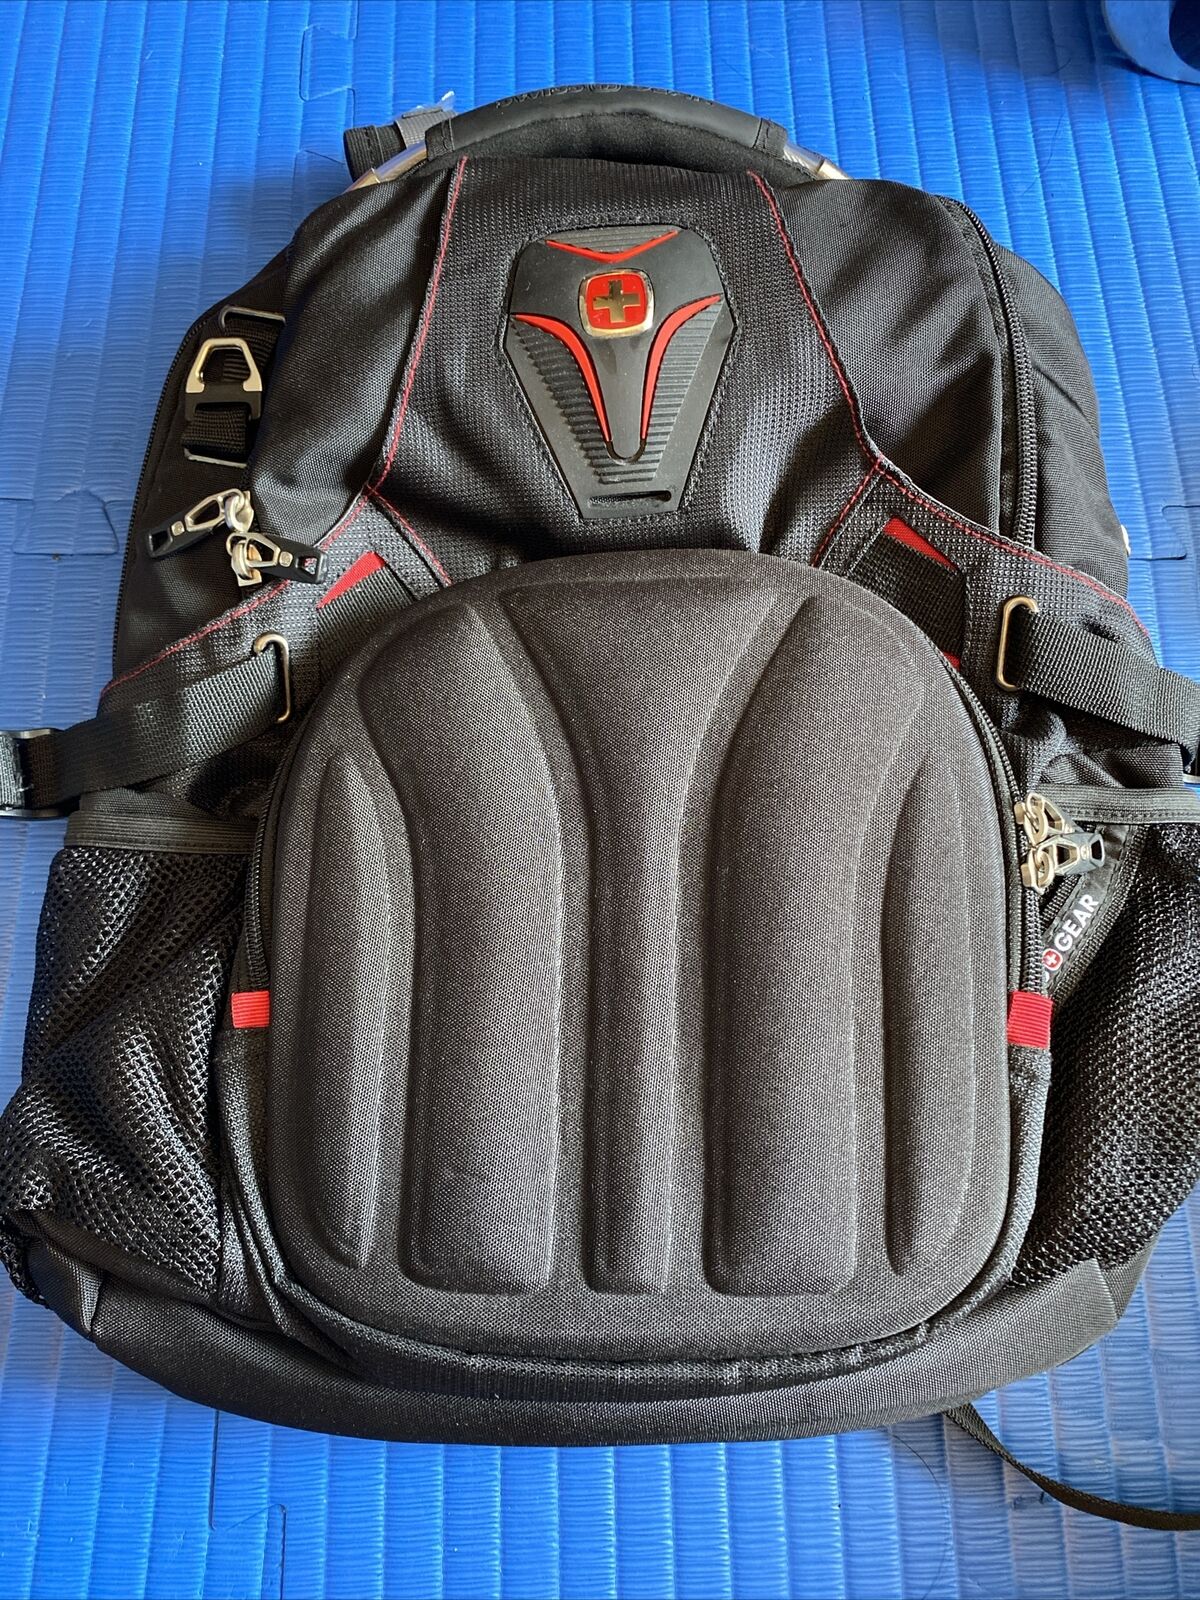 Swiss gear scan-smart Backpack With airflow Technology New Without Tag